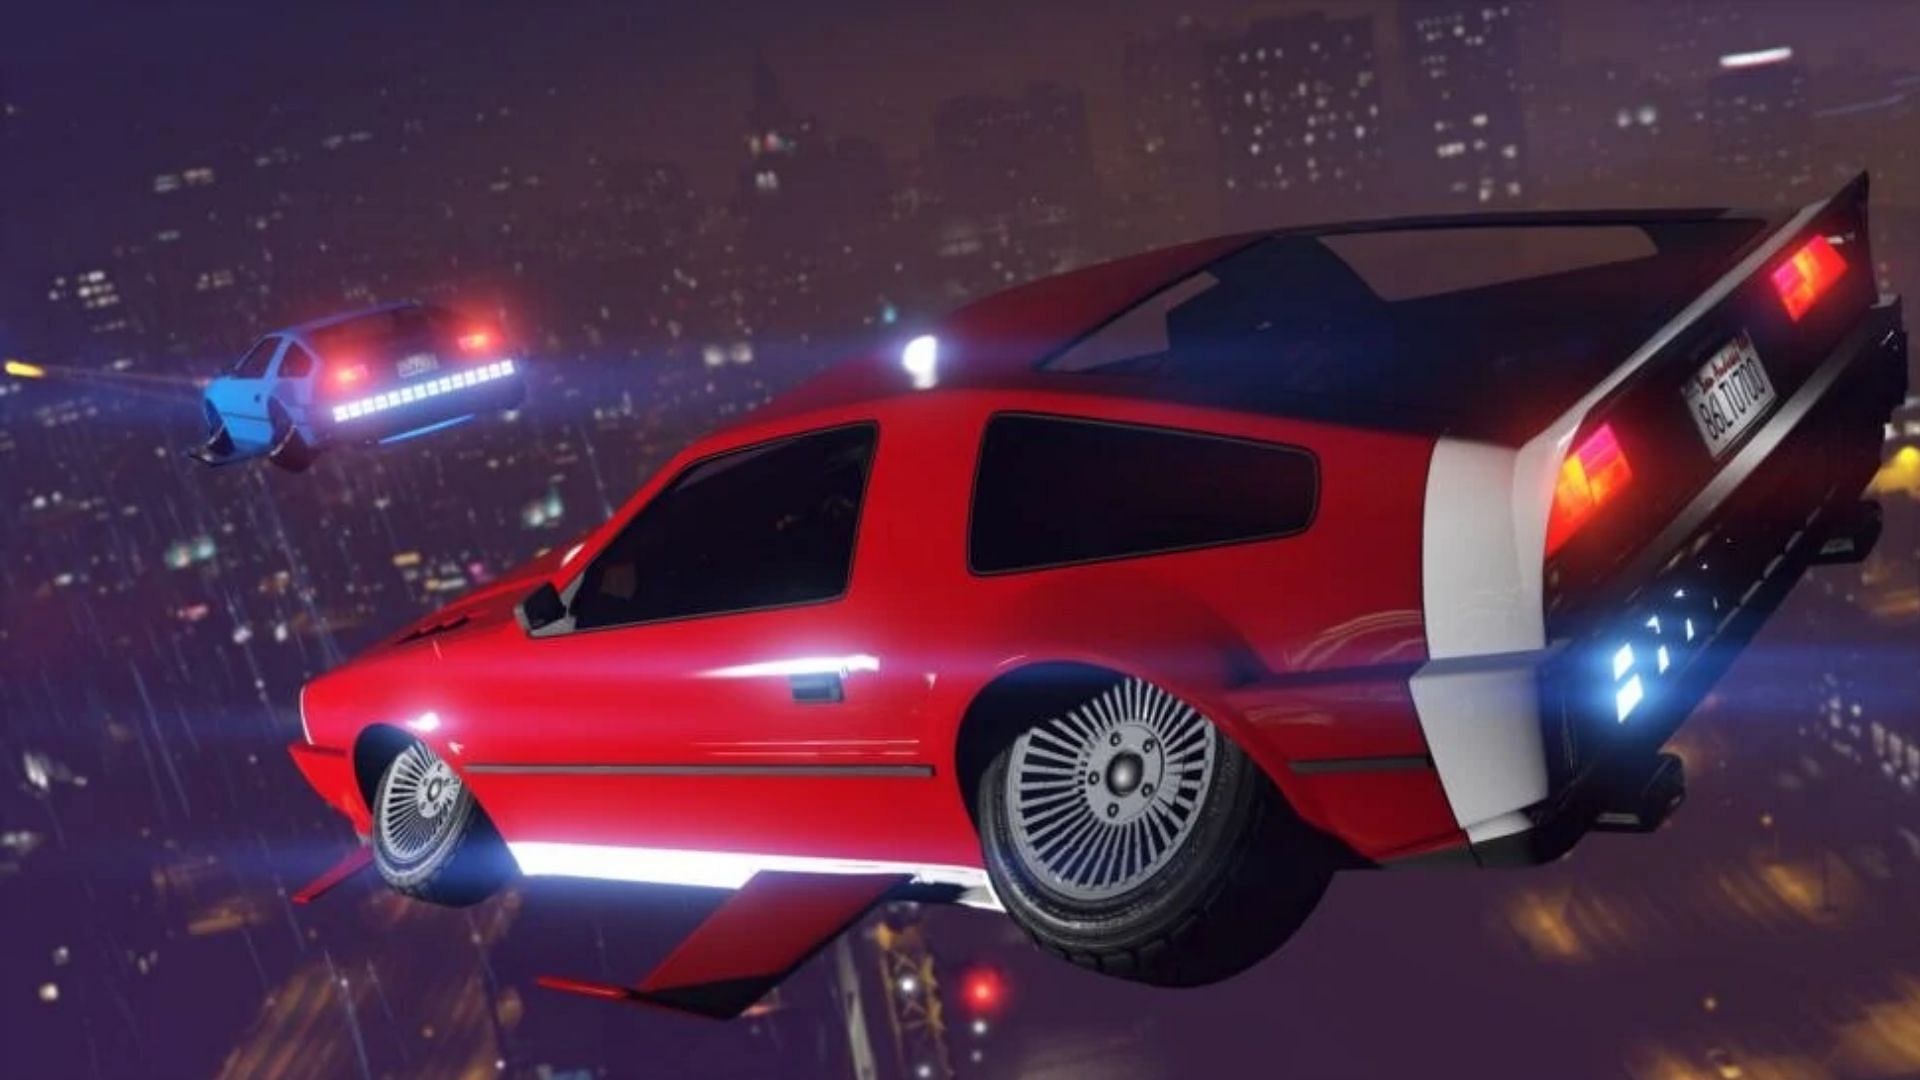 5 expensive vehicles in GTA Online that are worth buying